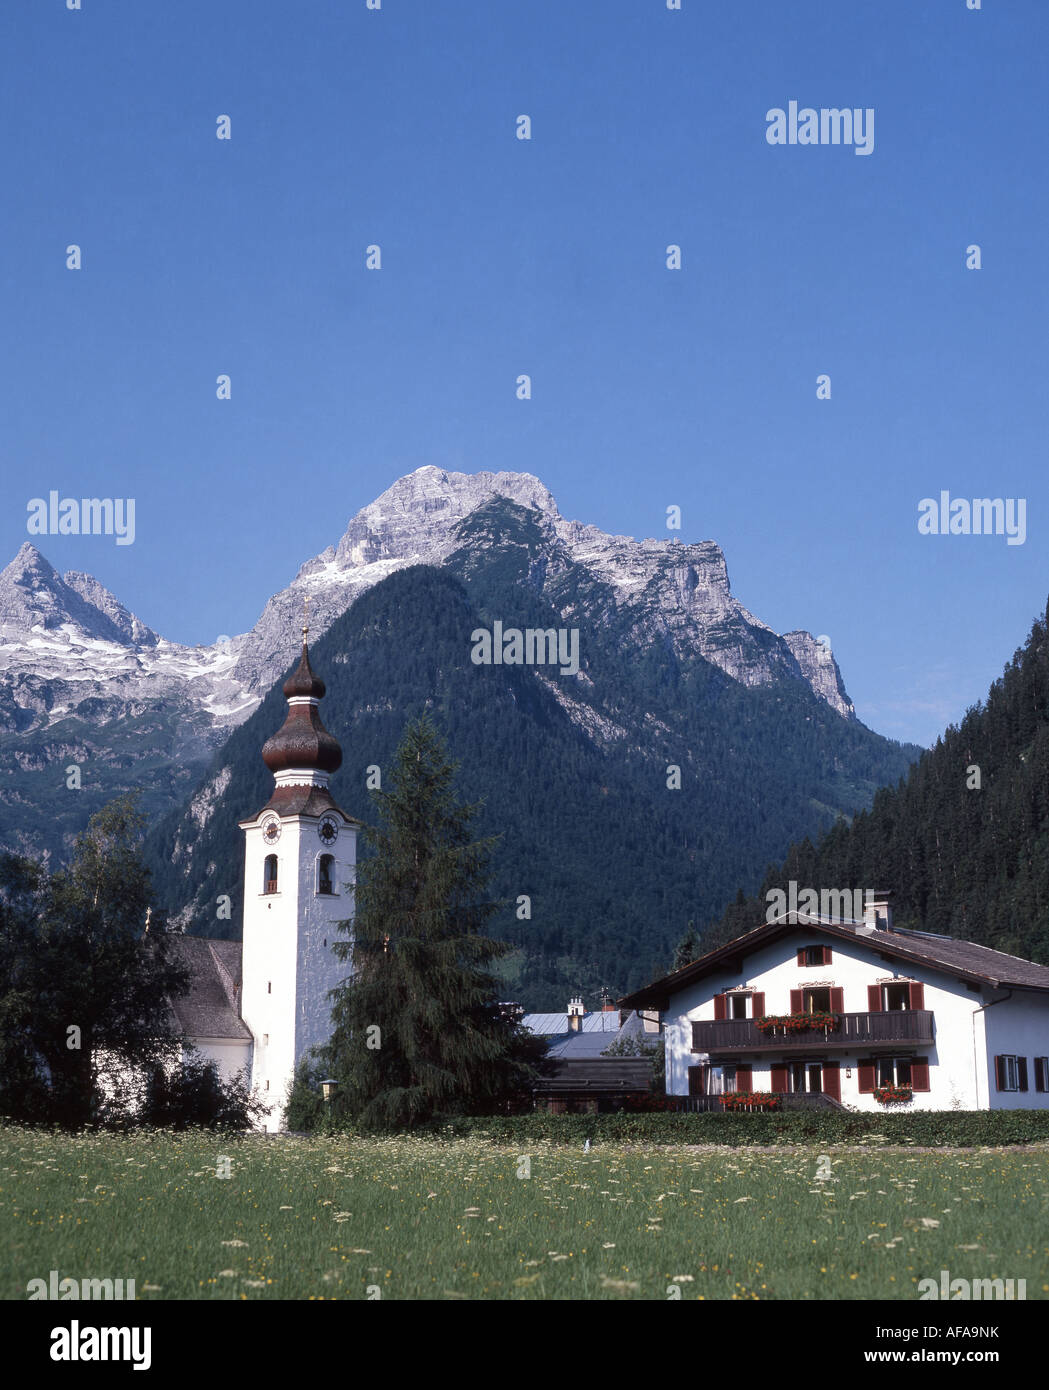 Our Lady of the Rosary Church and mountains, Lofer, Salzburg State, Republic of Austria Stock Photo